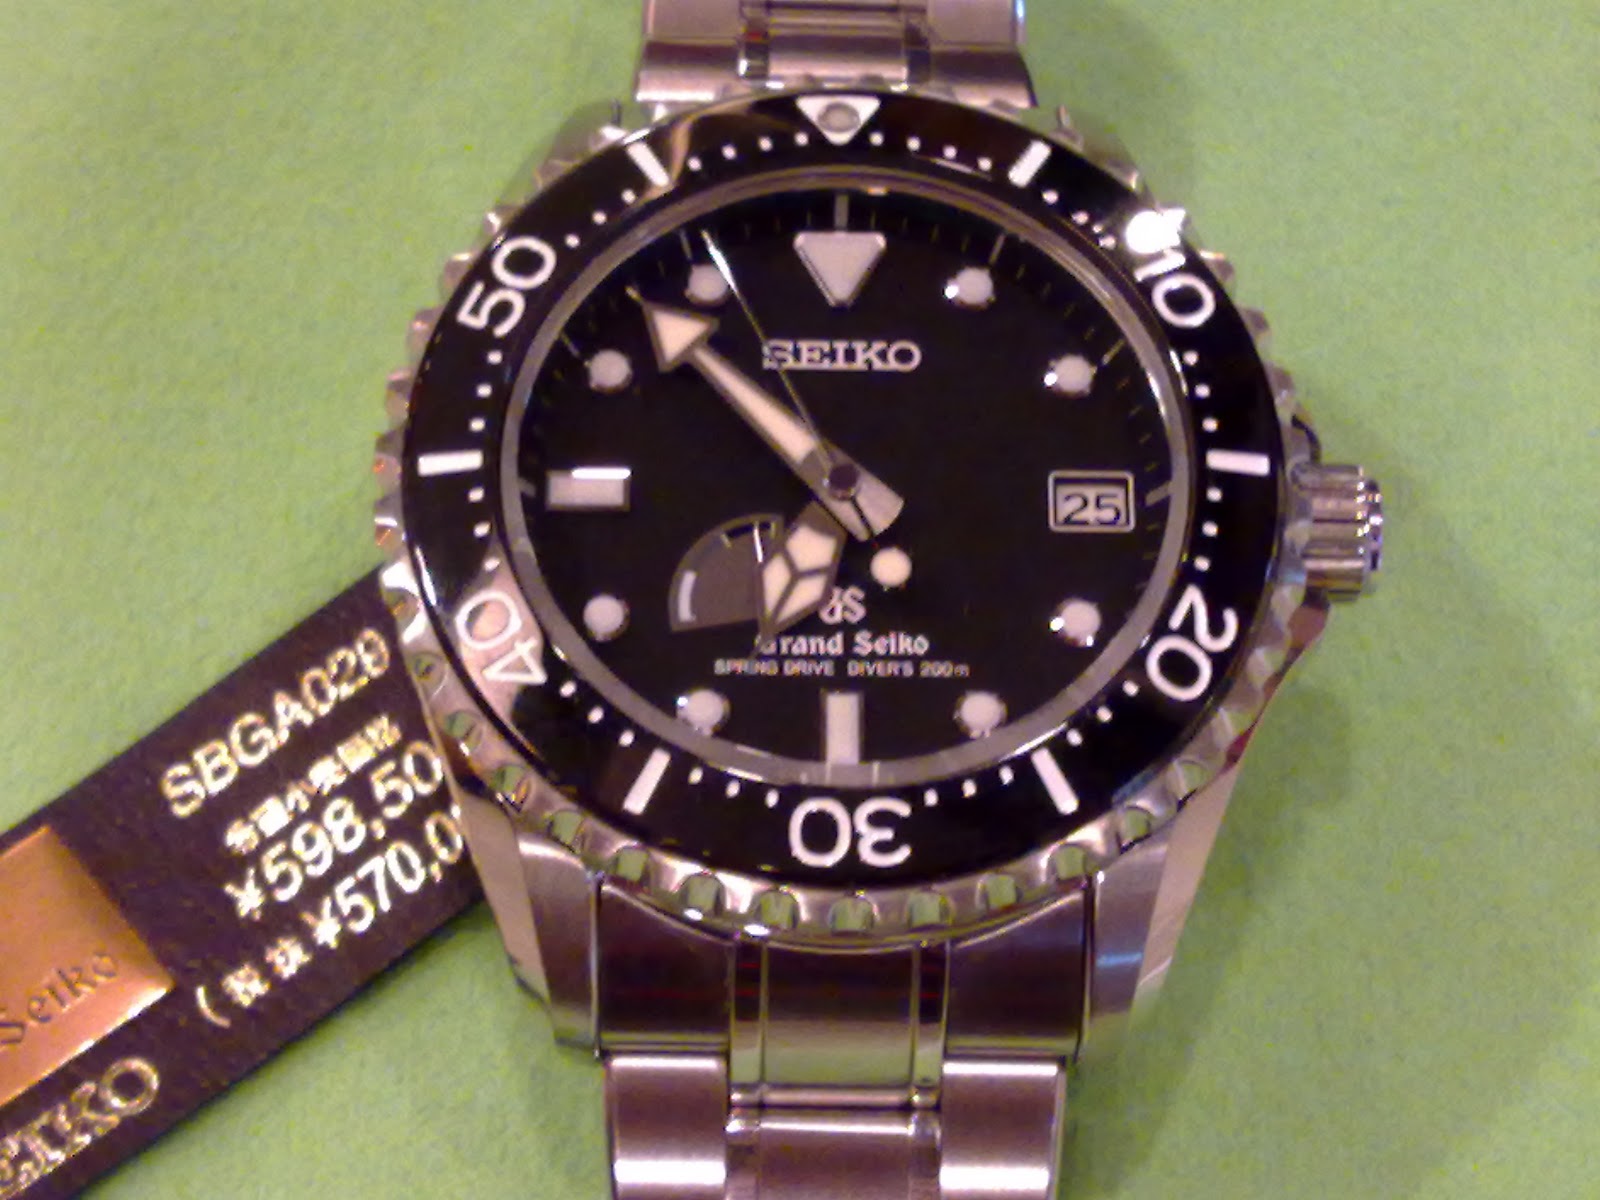 ... .00 for a Divers' watch from Seiko is classified expensive for me